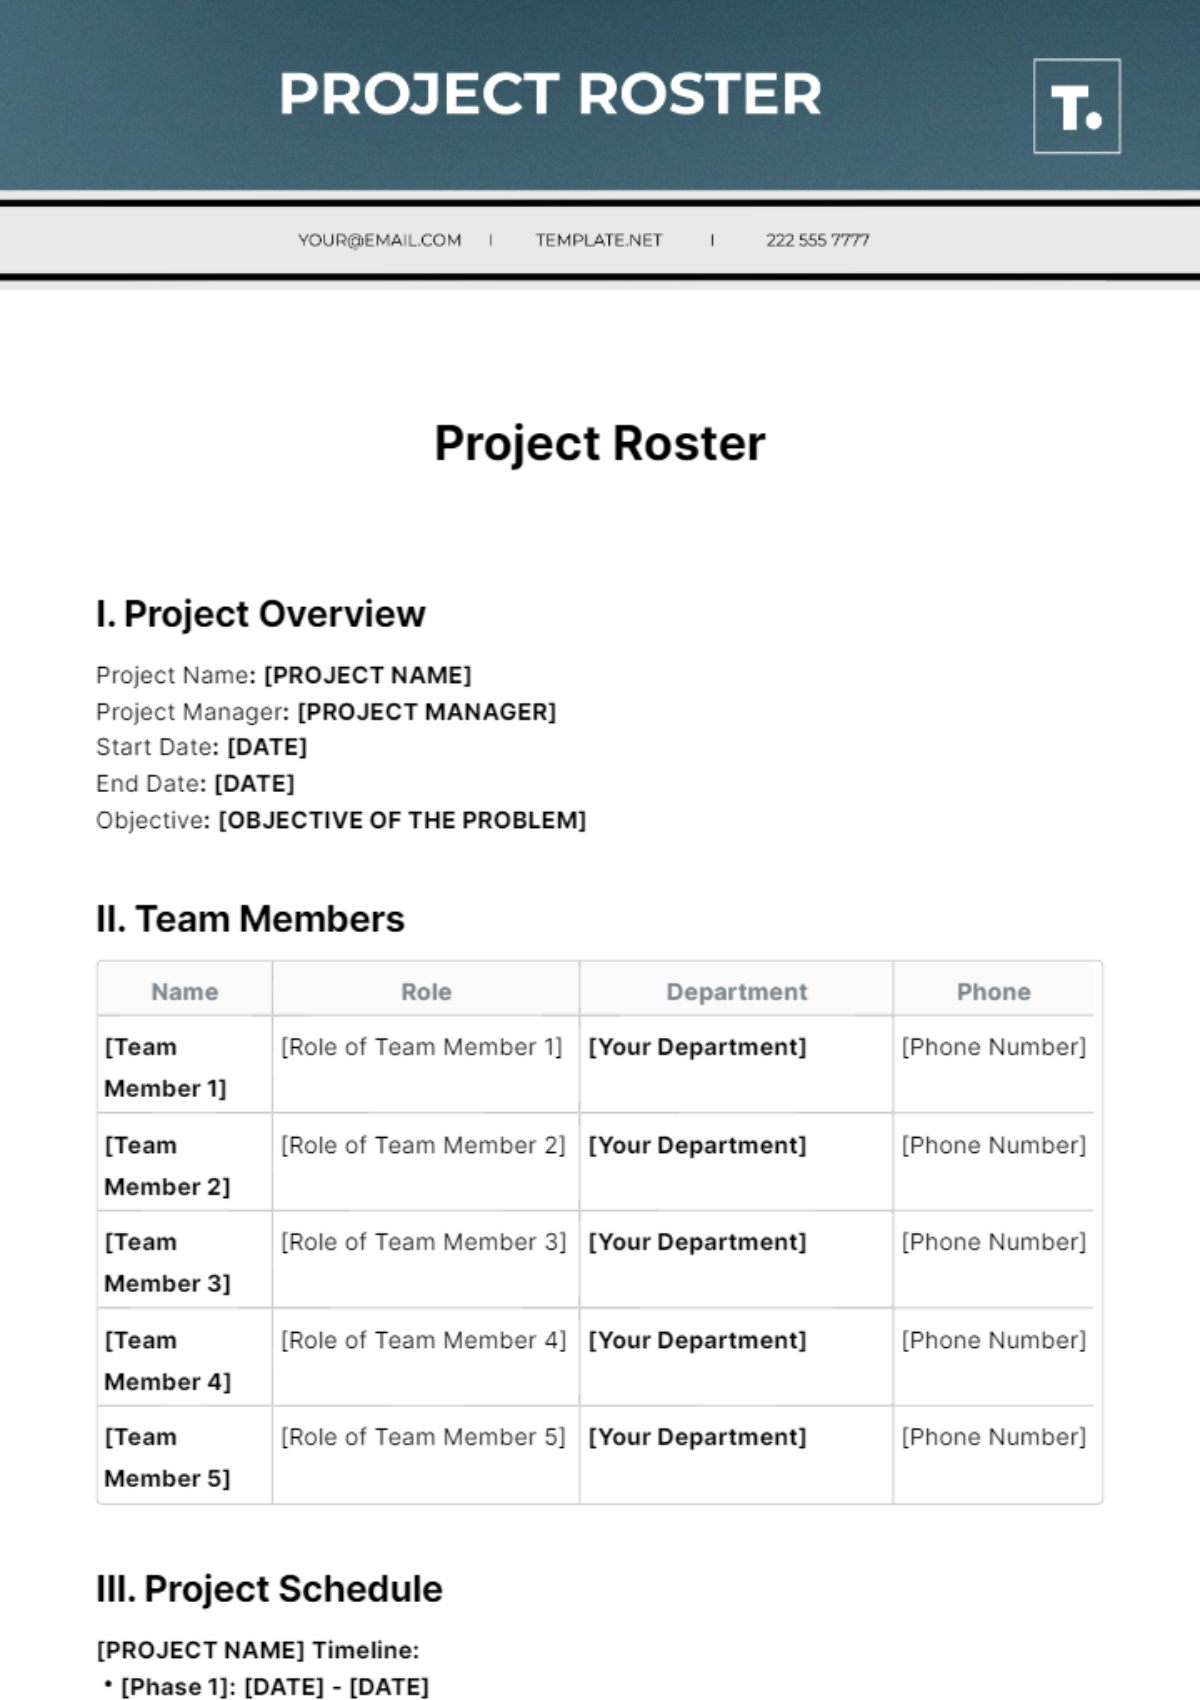 Project Roster Template